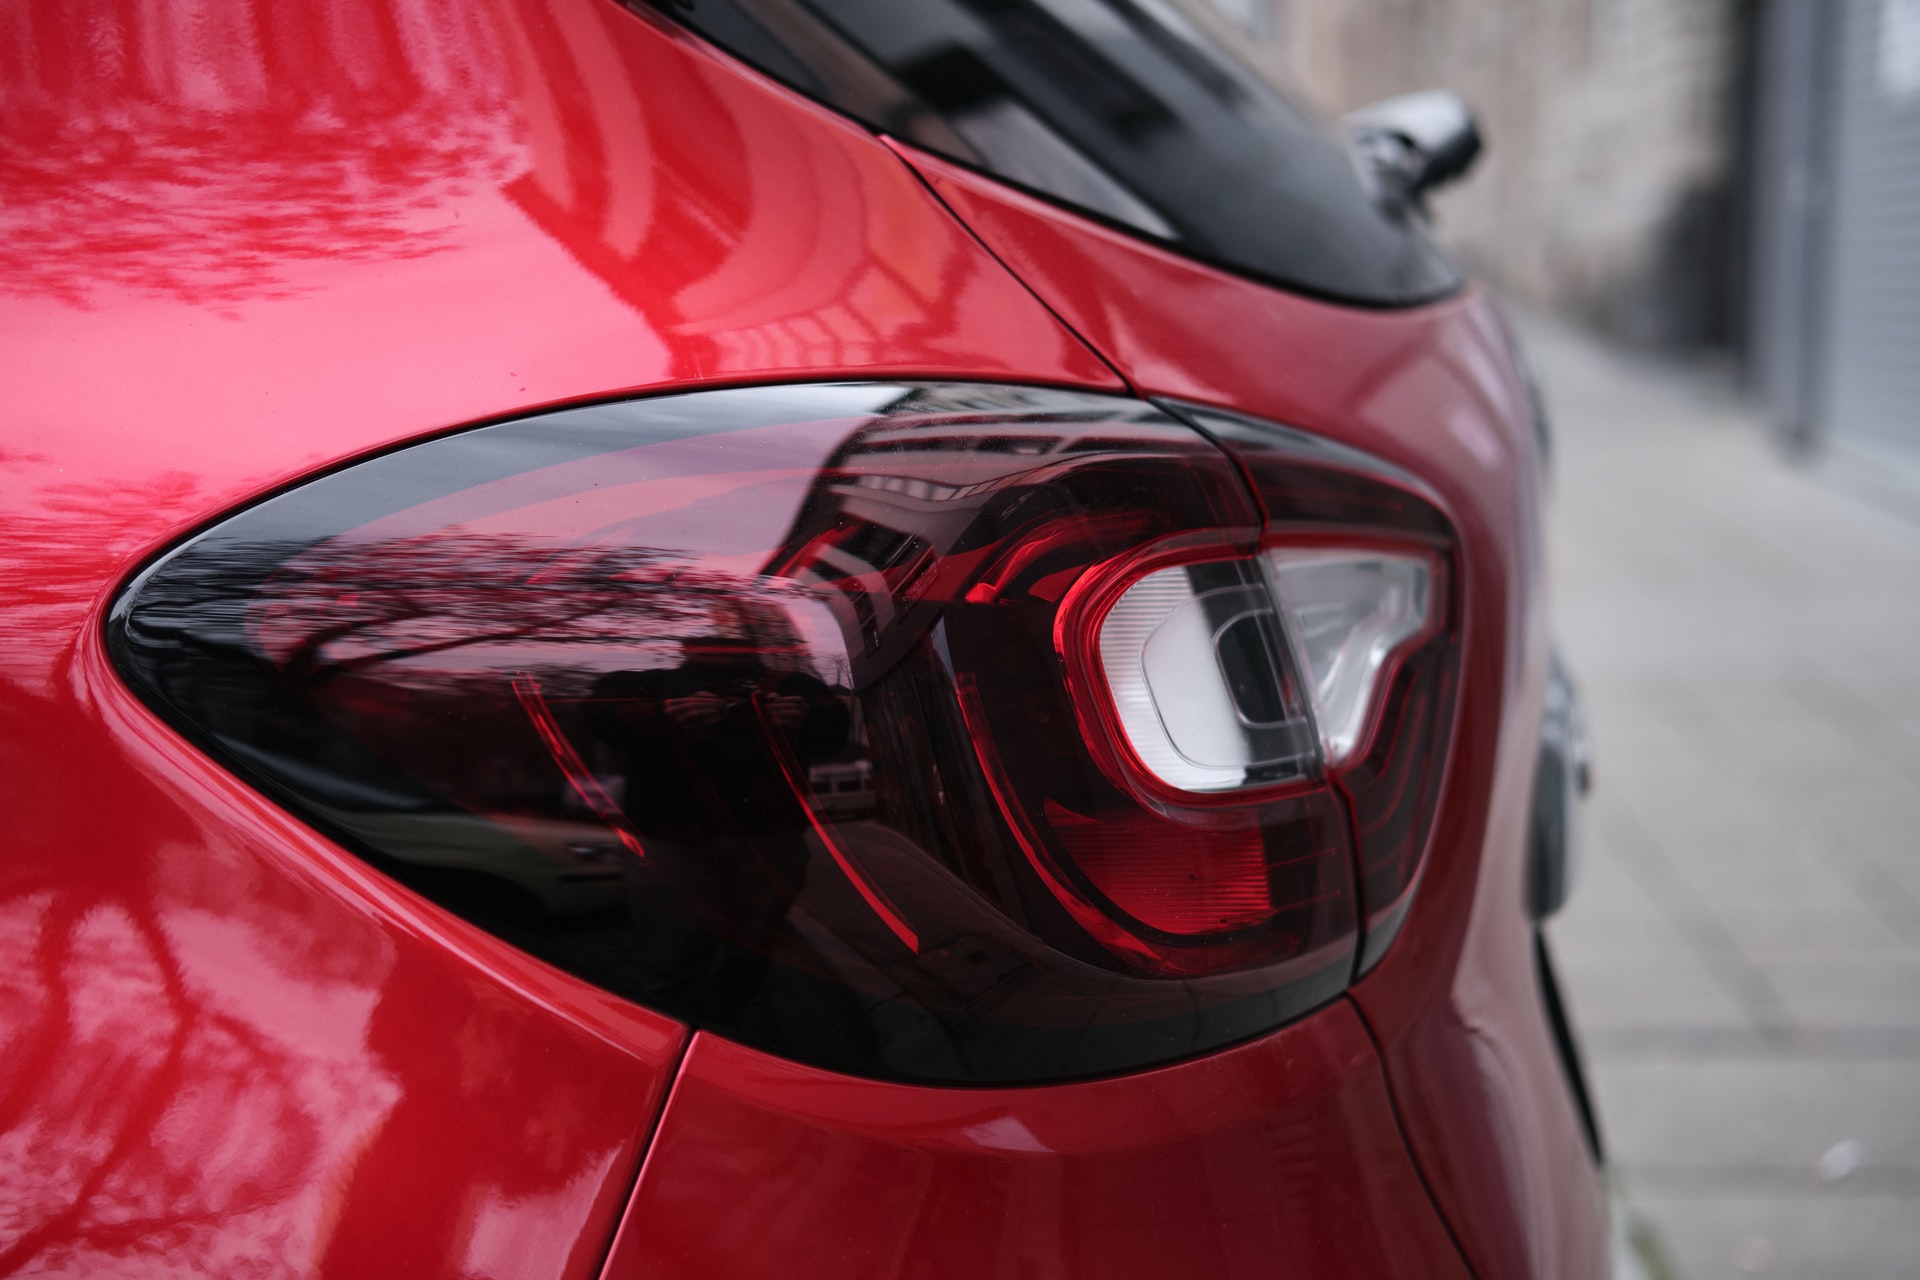 Close up of a taillight on a red car